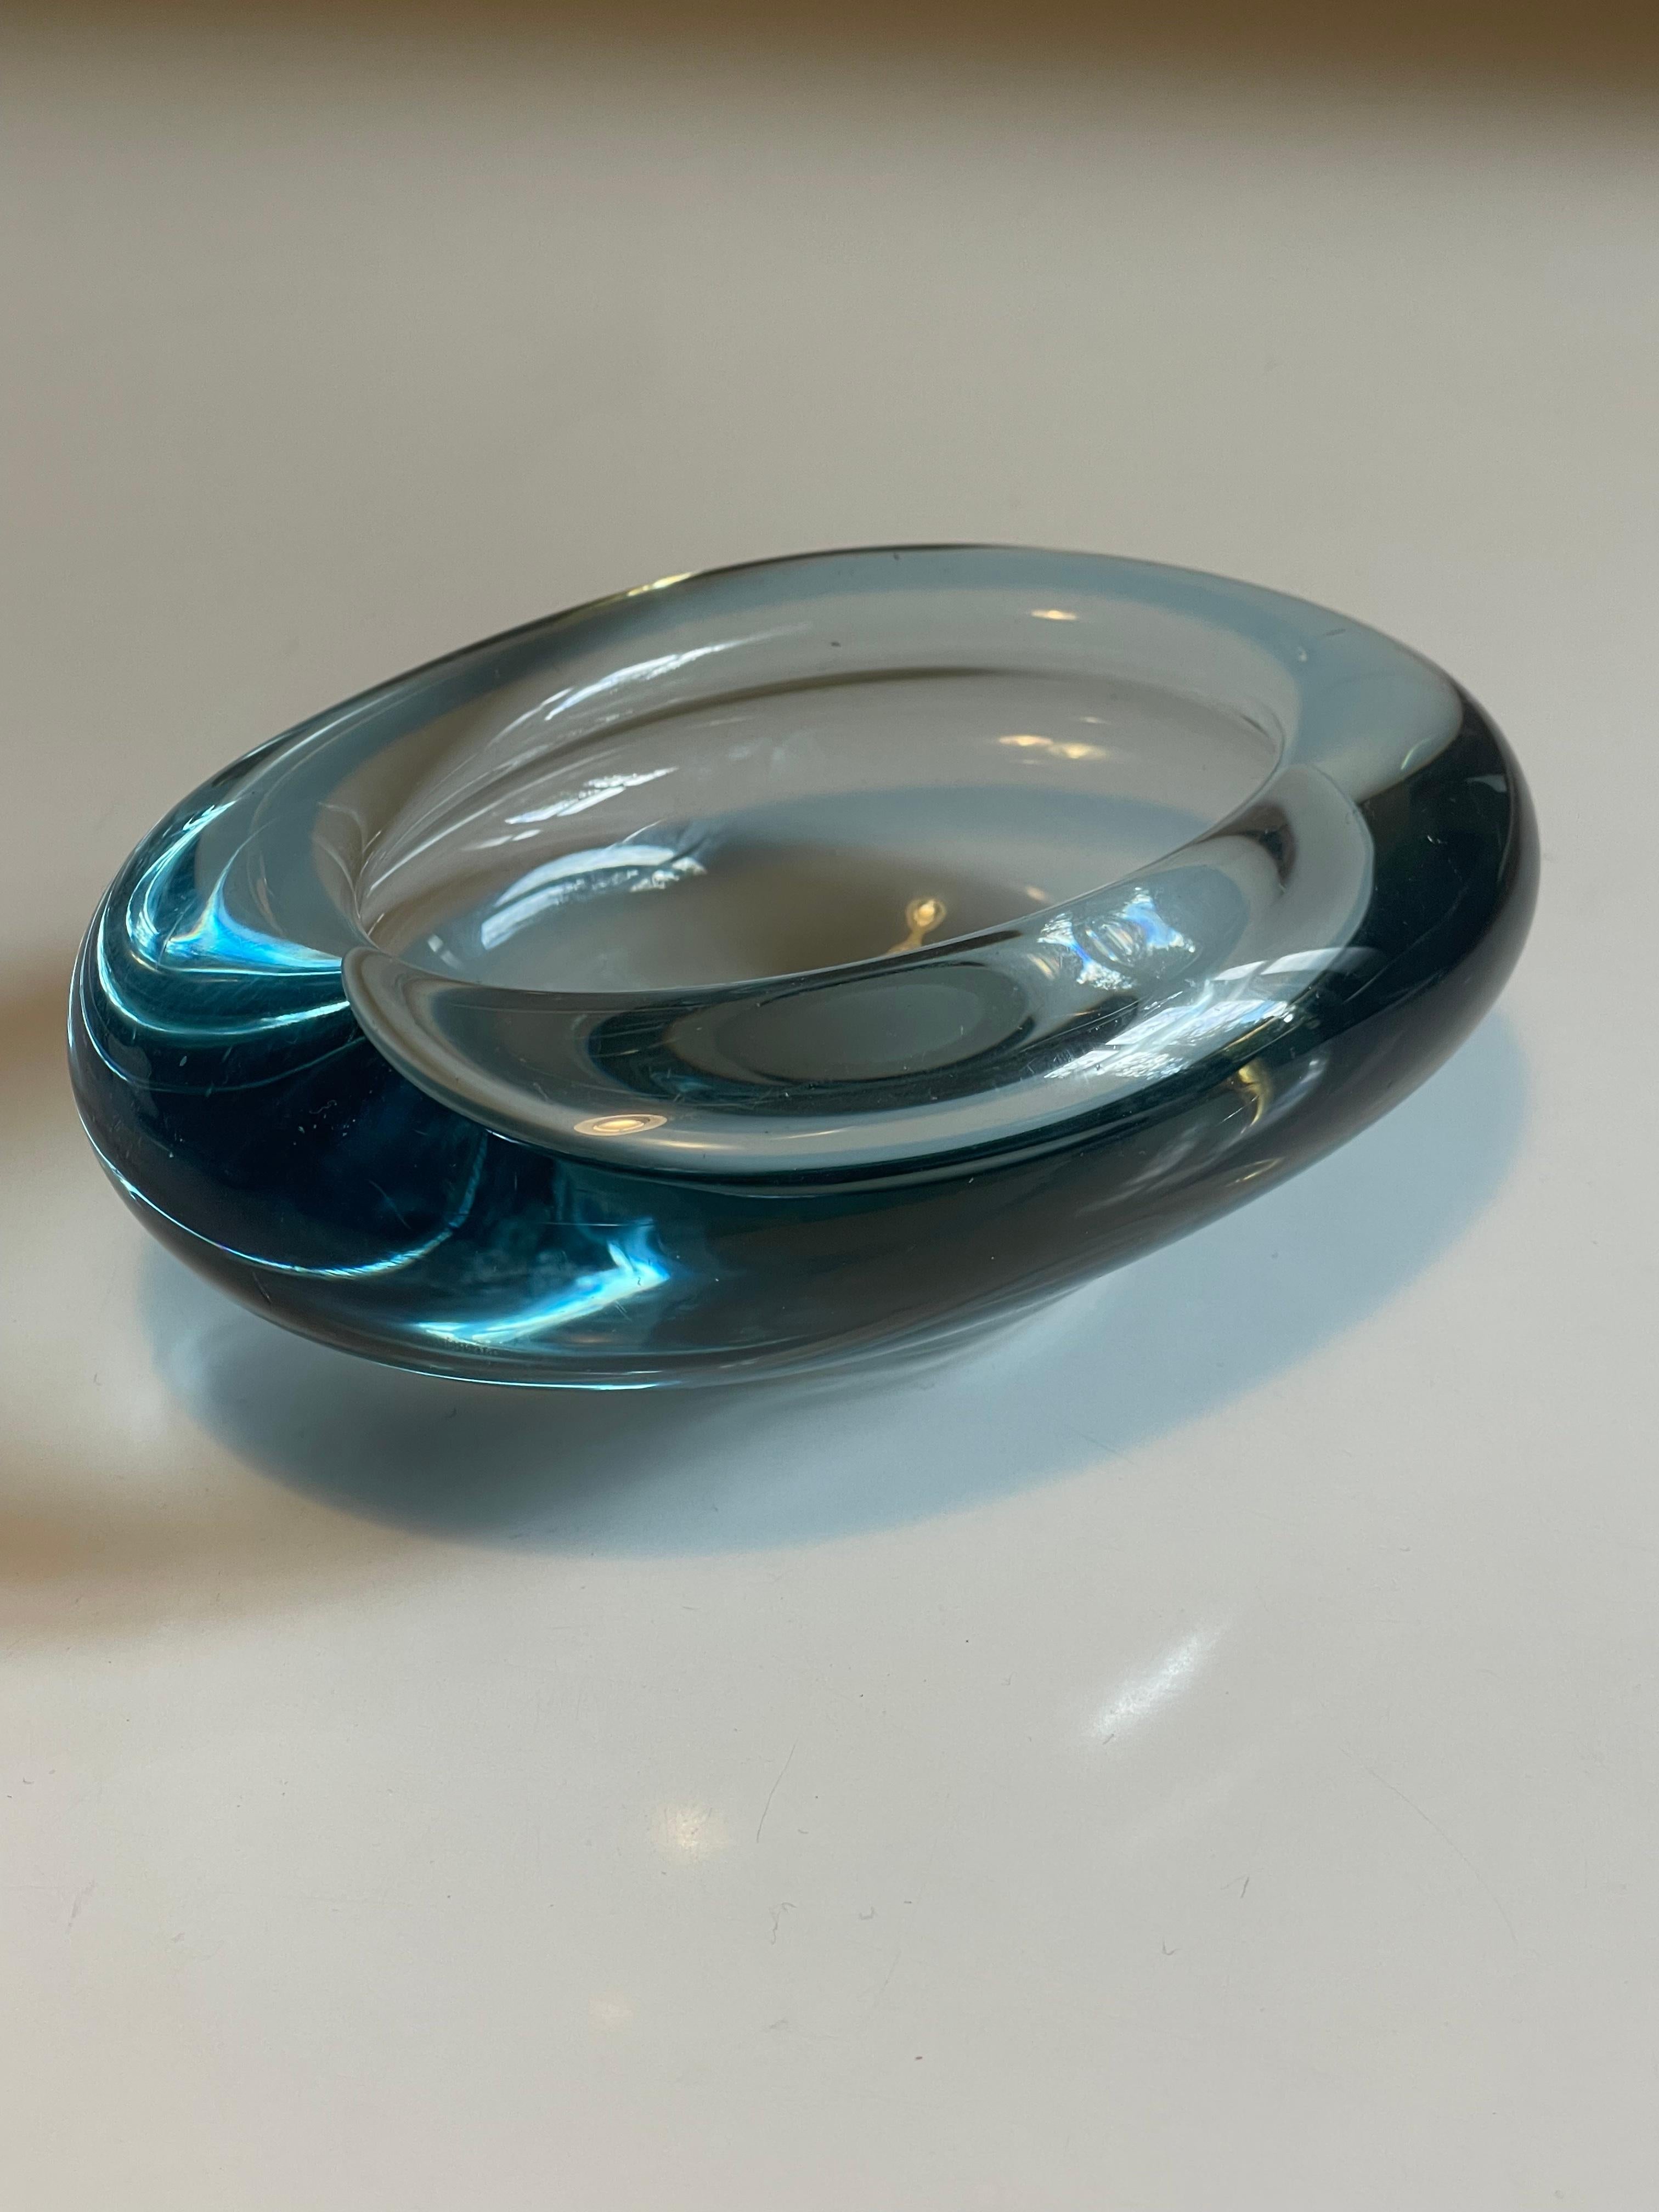 A stunning Scandinavian Akva (aqua) blue glass bowl. Made by Holmegaard of Denmark and designed by Per Lutken in the 1950's, pattern number 15735, signed to base. Beautiful as a standalone object to bring the elements of glass, shape and color into